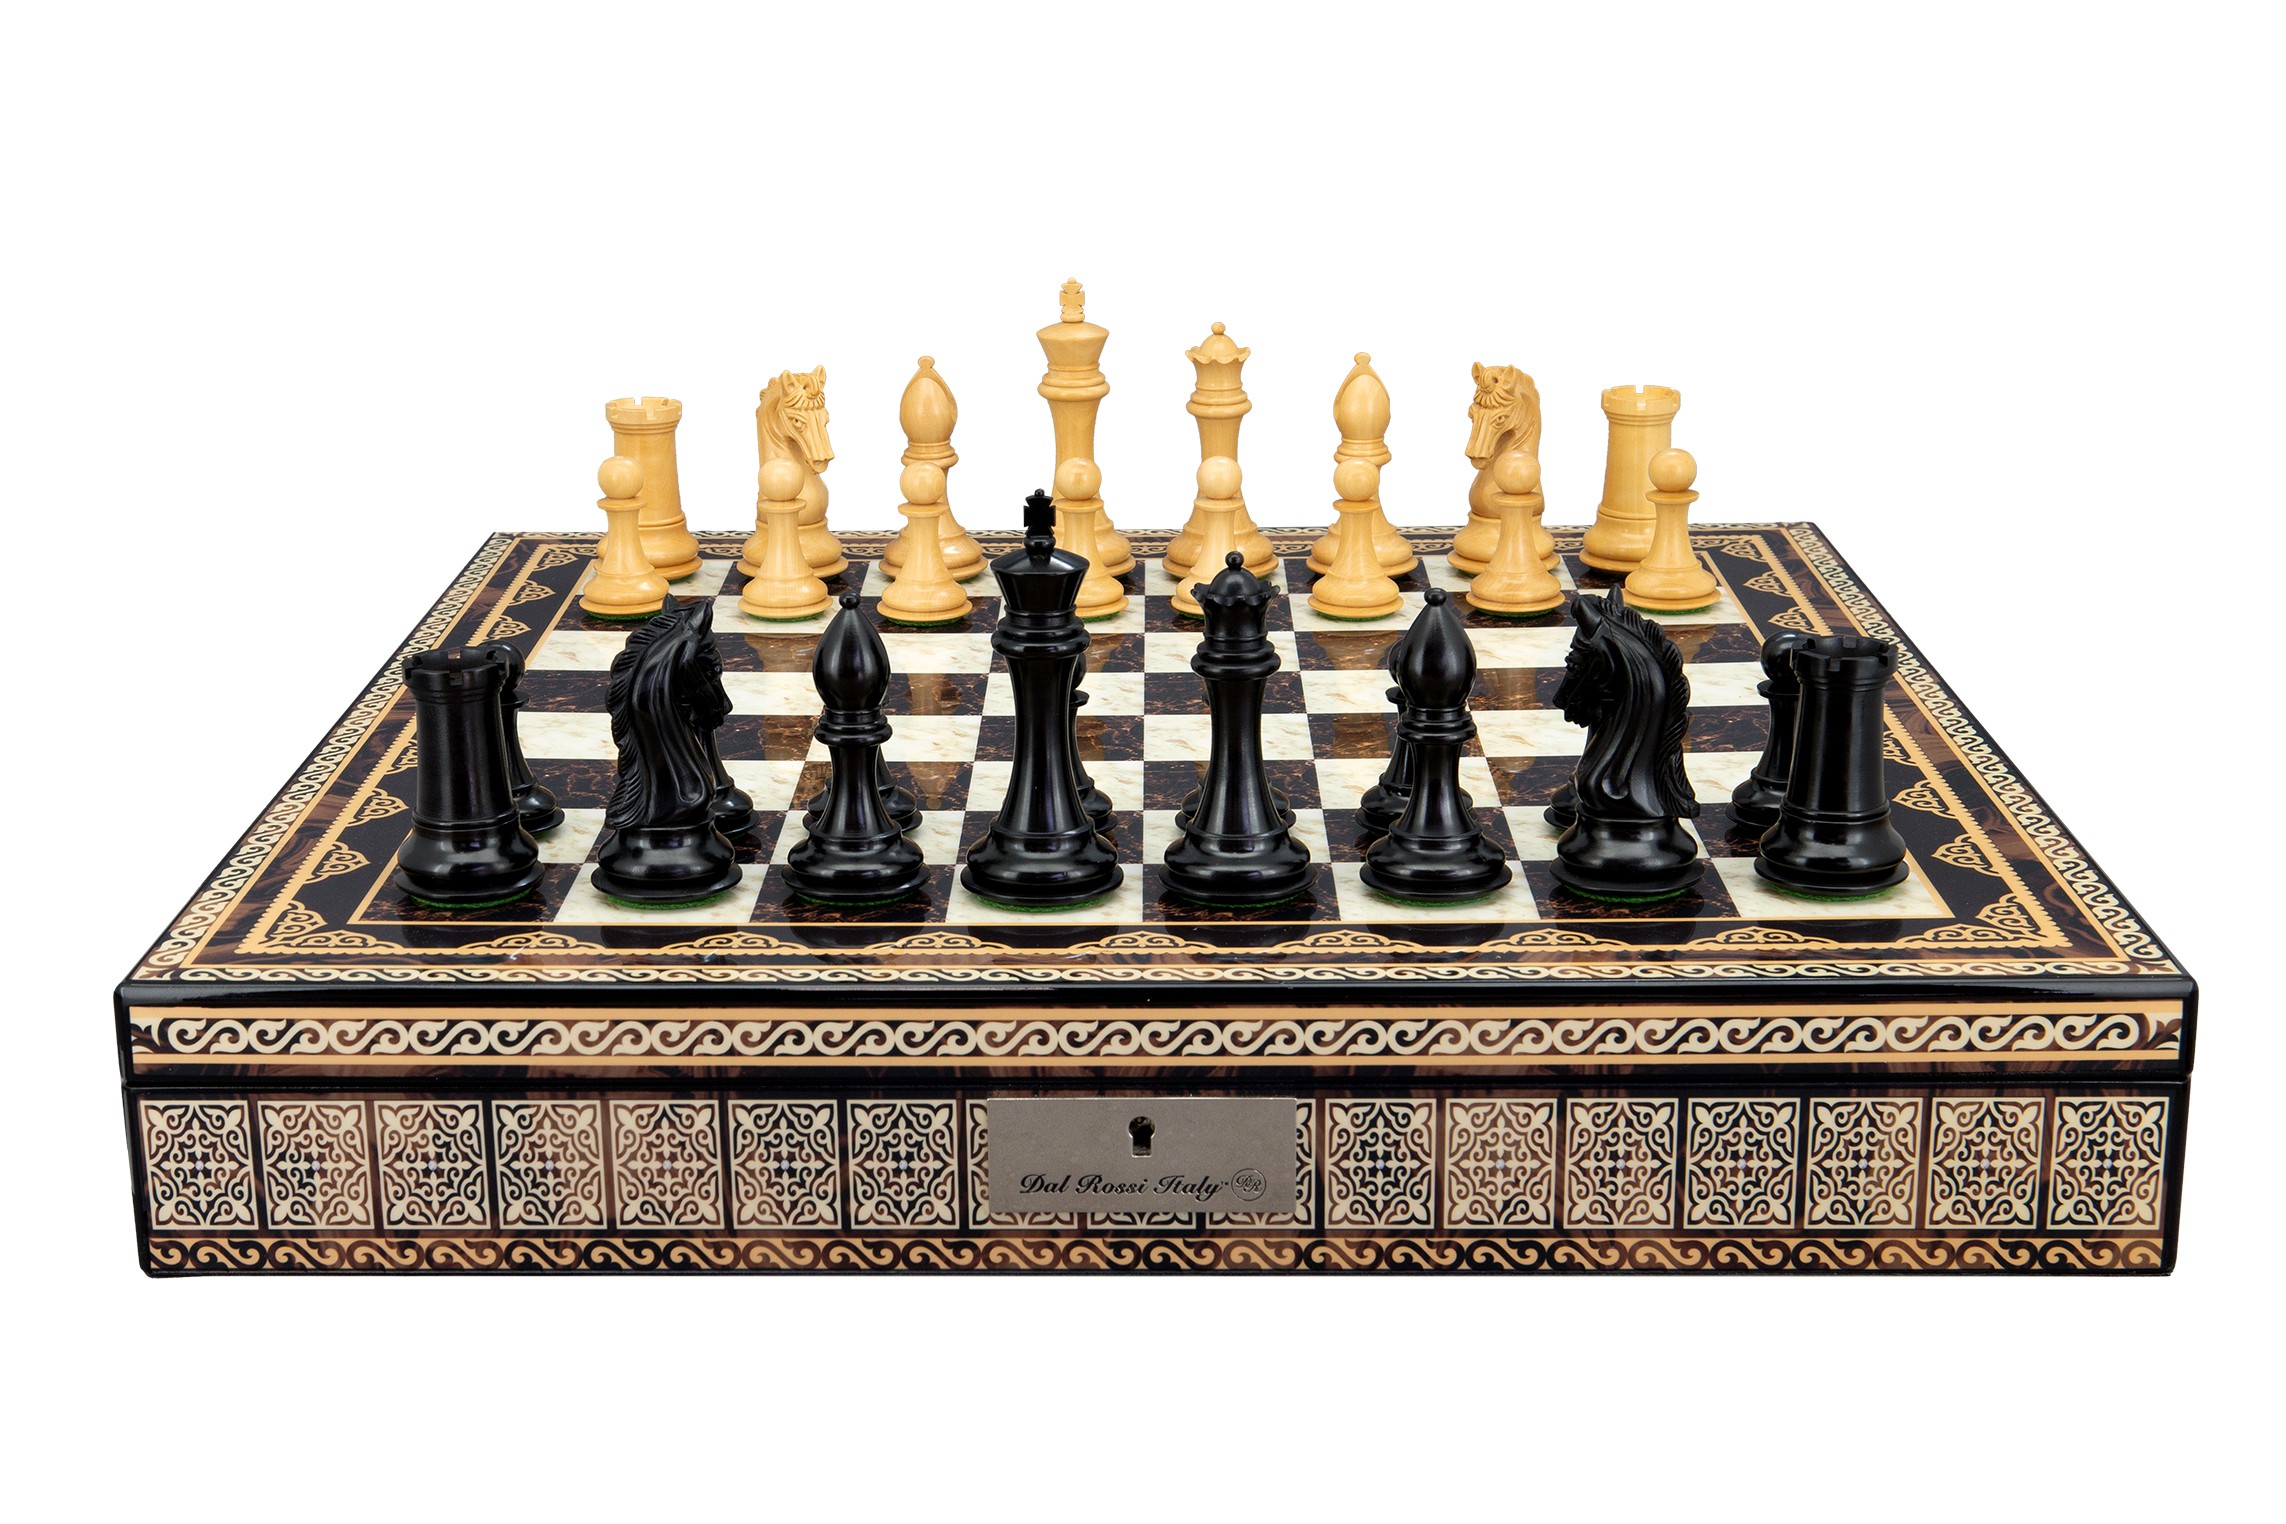 Dal Rossi Italy, Ebony Finish / Boxwood 105mm Wood Double Weighted on a Mosaic Finish Shiny Chess Box with Compartments 20"